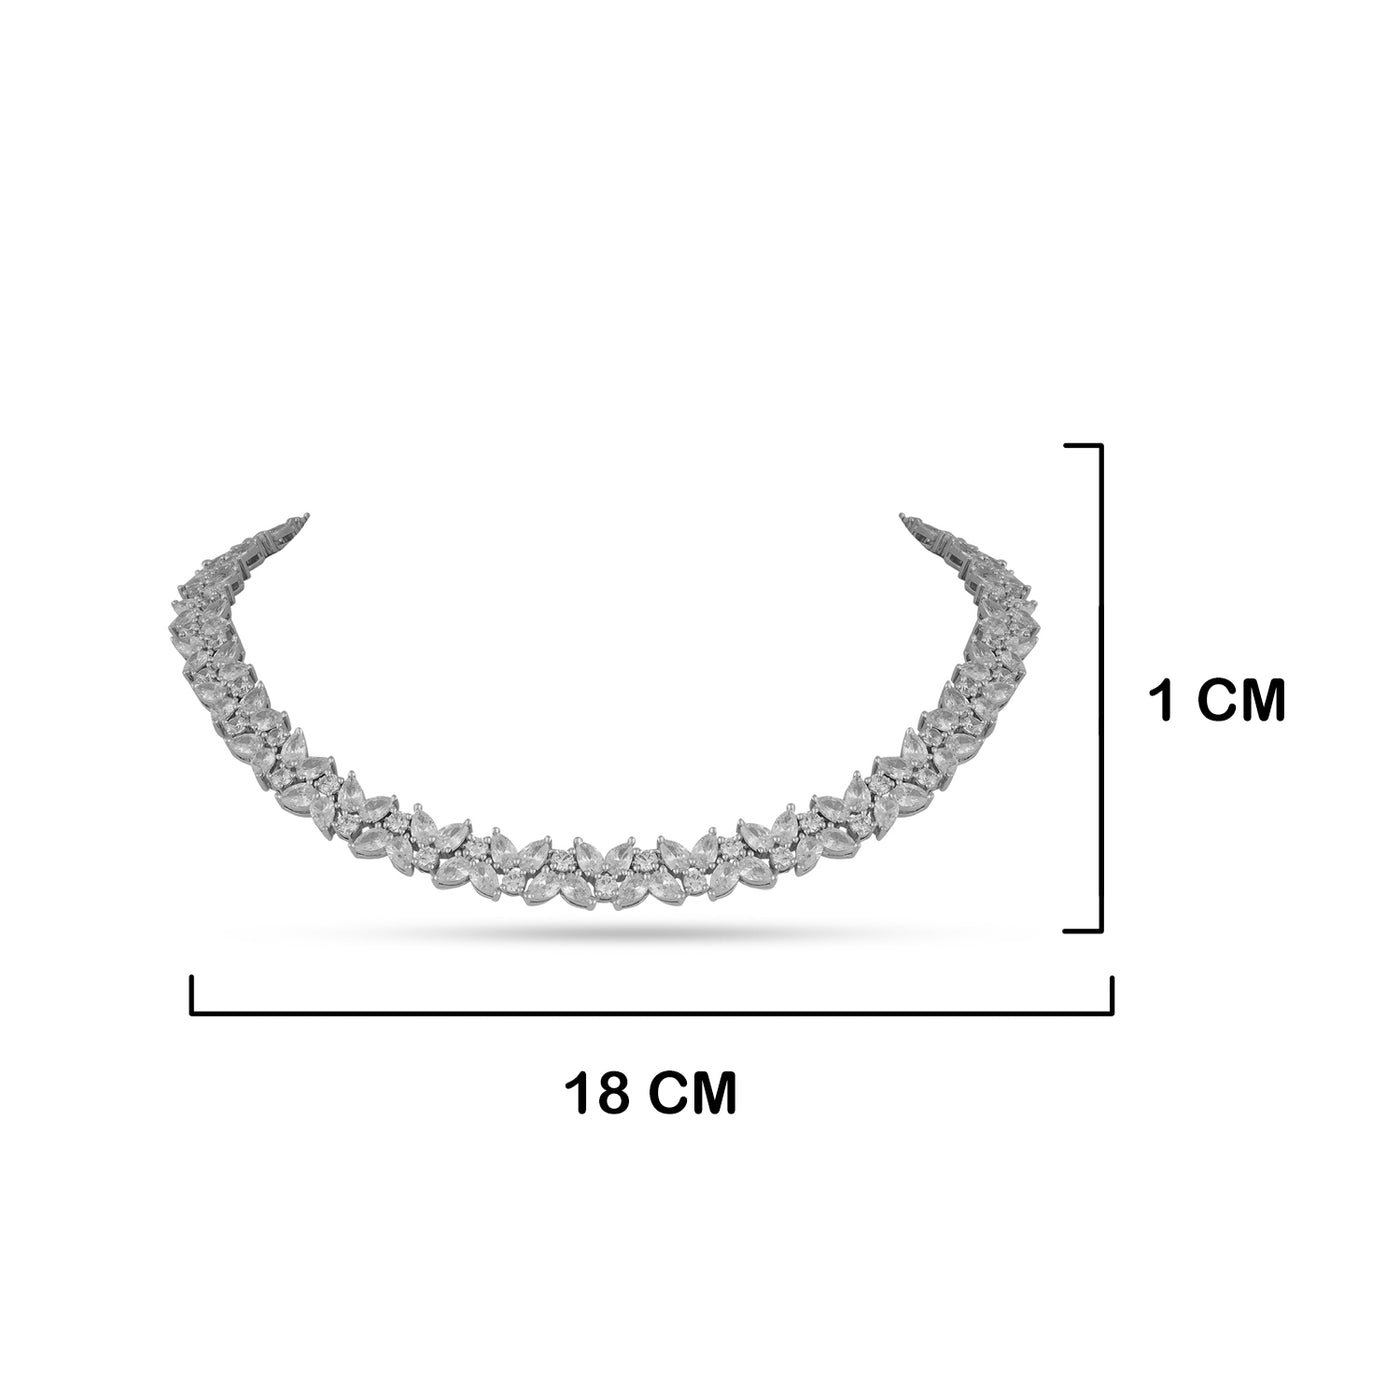 American Diamond Necklace with measurements in cm.